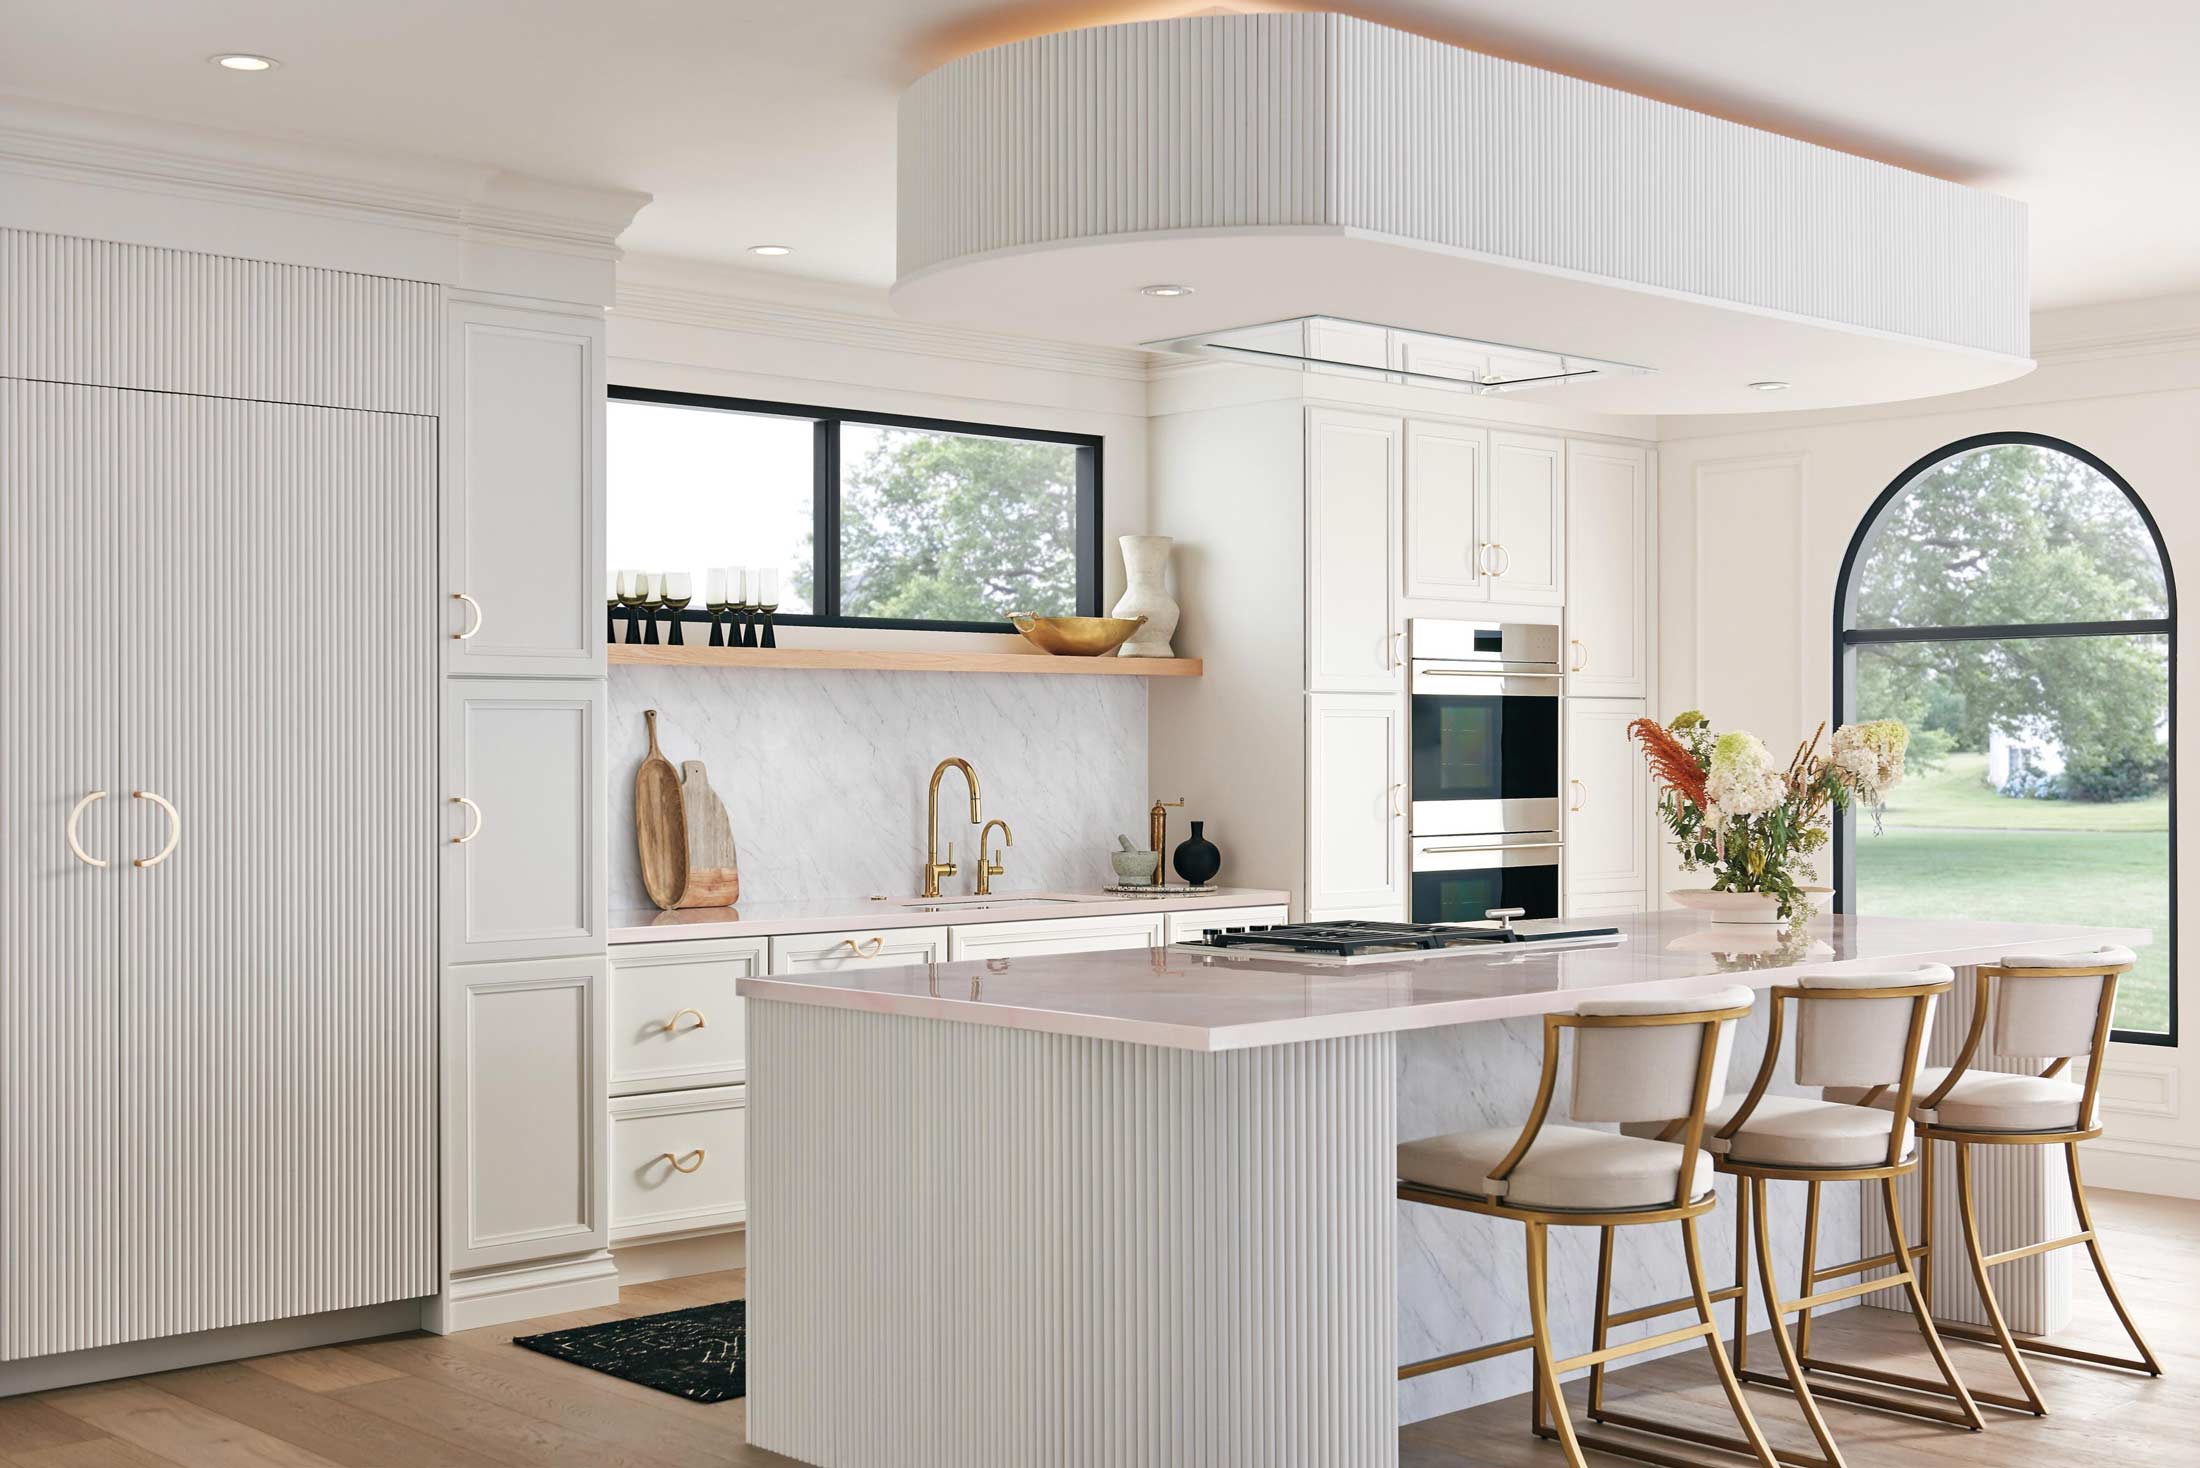 A large modern kitchen painting white with gold accents